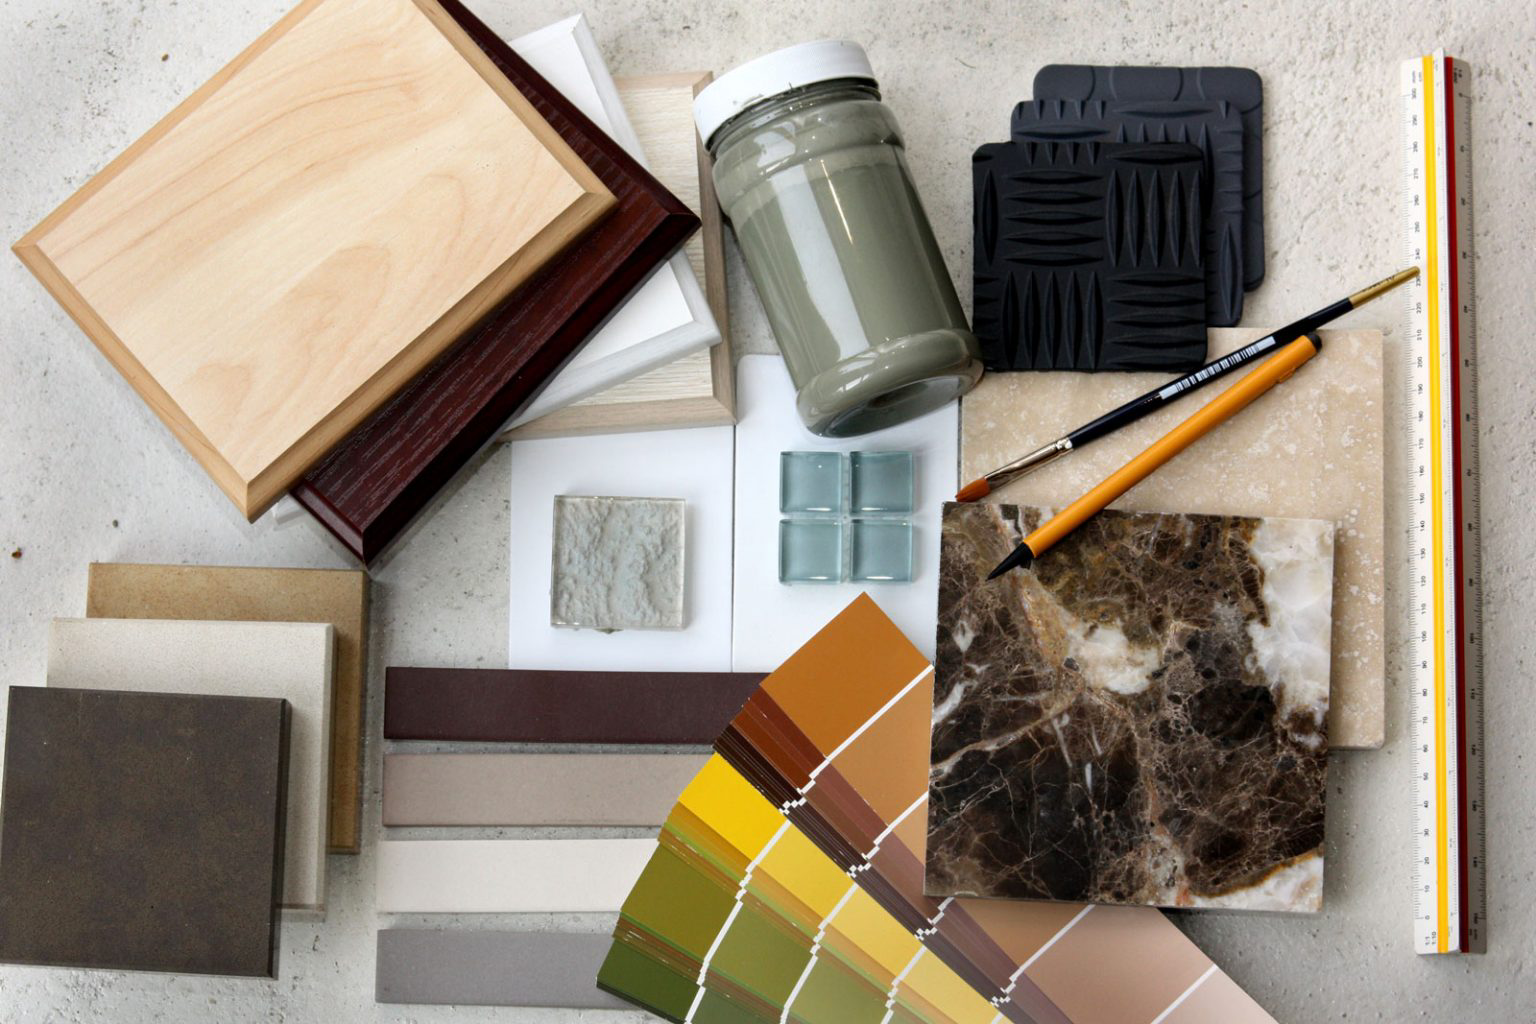 A variety of paint swatches and sample textures and tones.